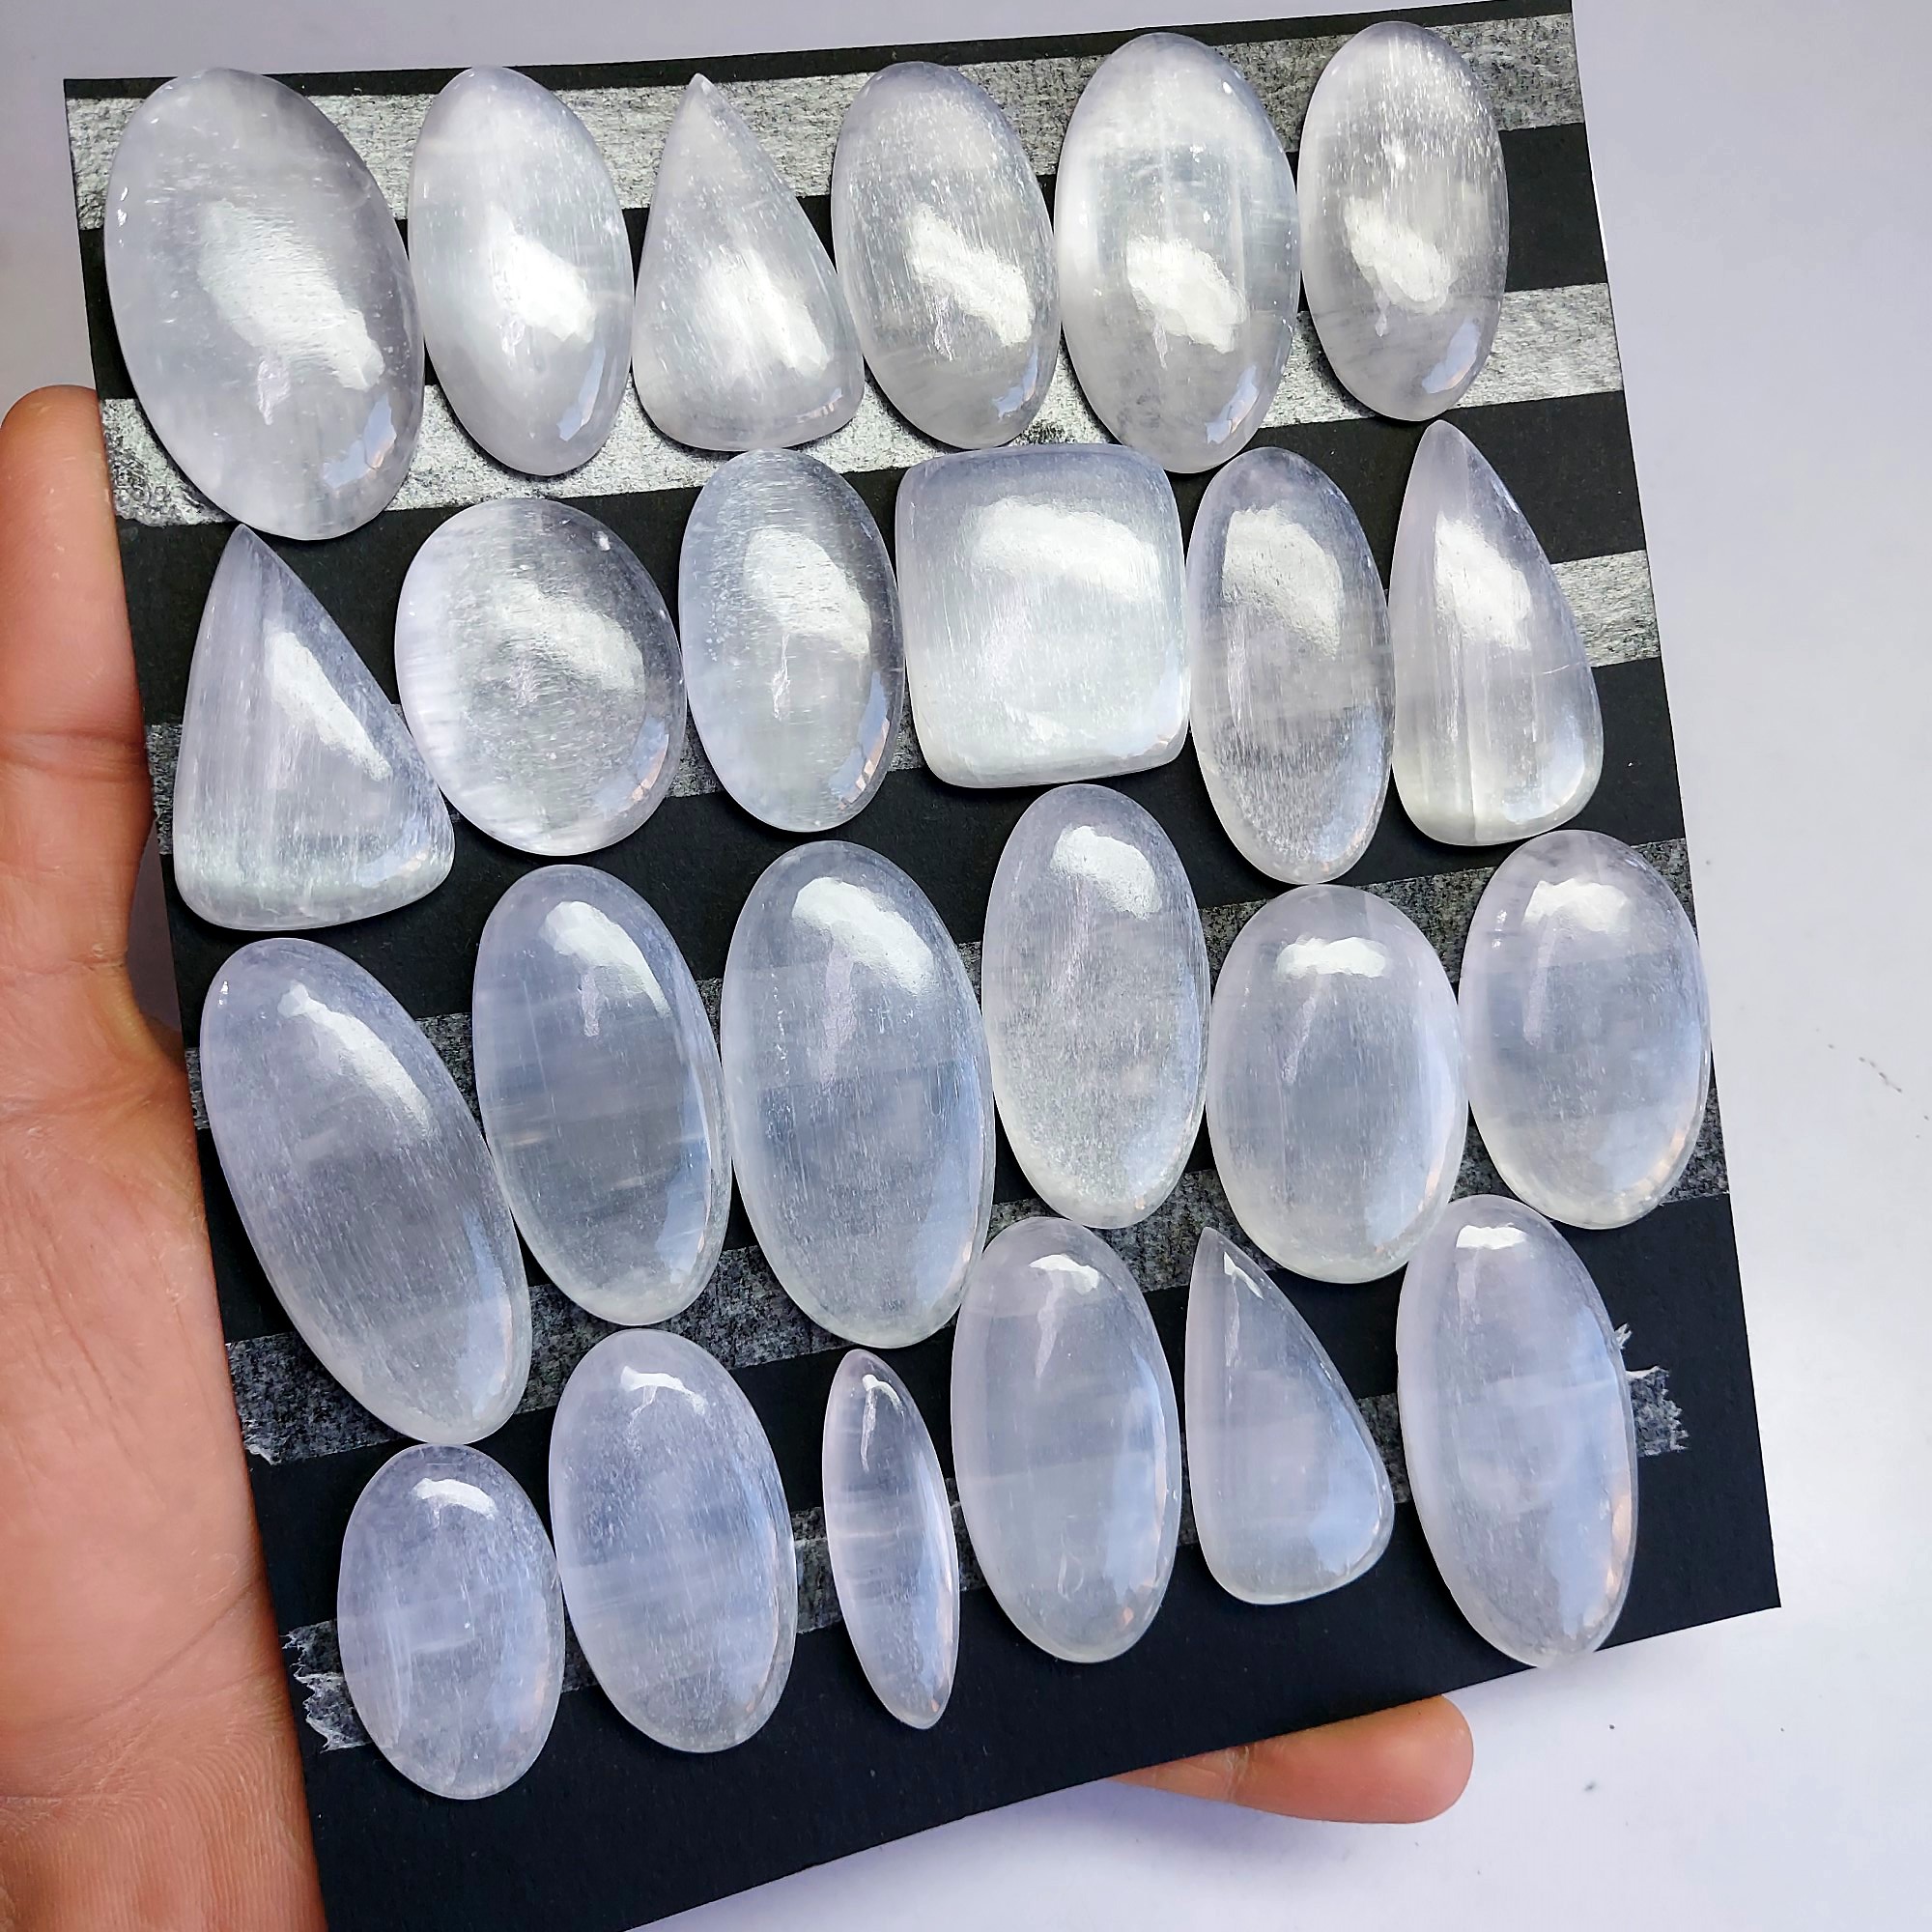 24pcs 1505 Cts Natural White Selenite Loose Cabochon Lot  Gemstone For Jewelry Wholesale Lot Size 52x24 30x20mm